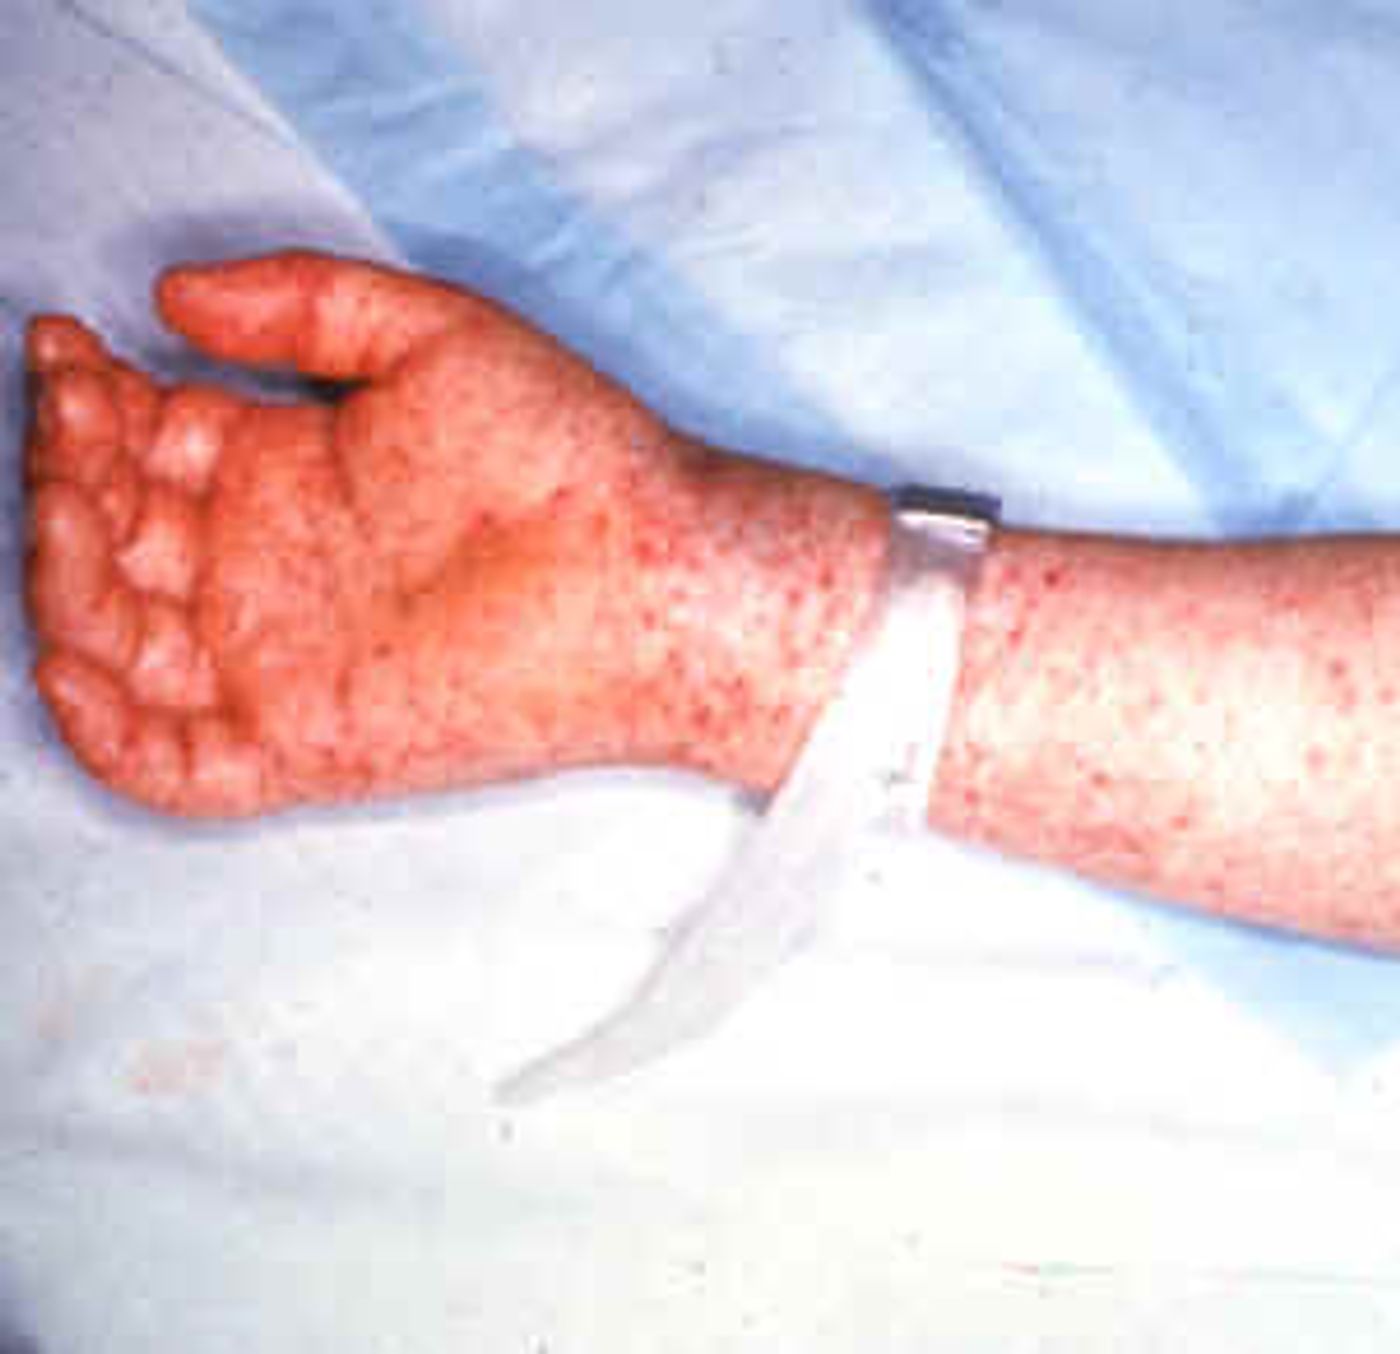 A rash typical of many cases of Rocky Mountain Spotted Fever